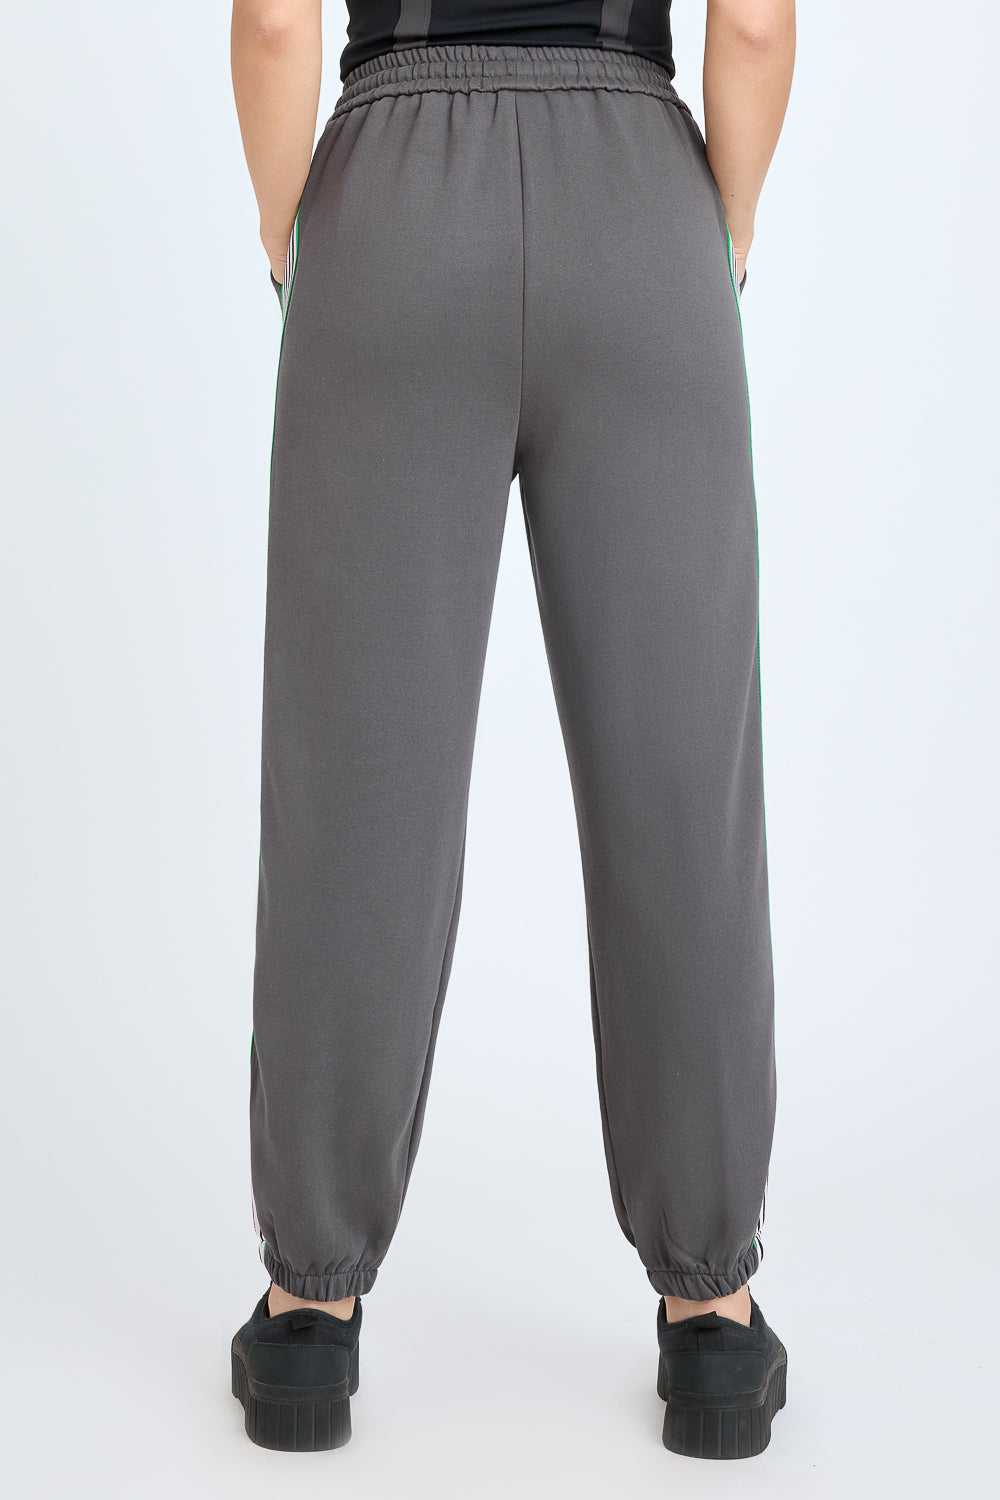 SIDE-STRIPED GREY JOGGERS